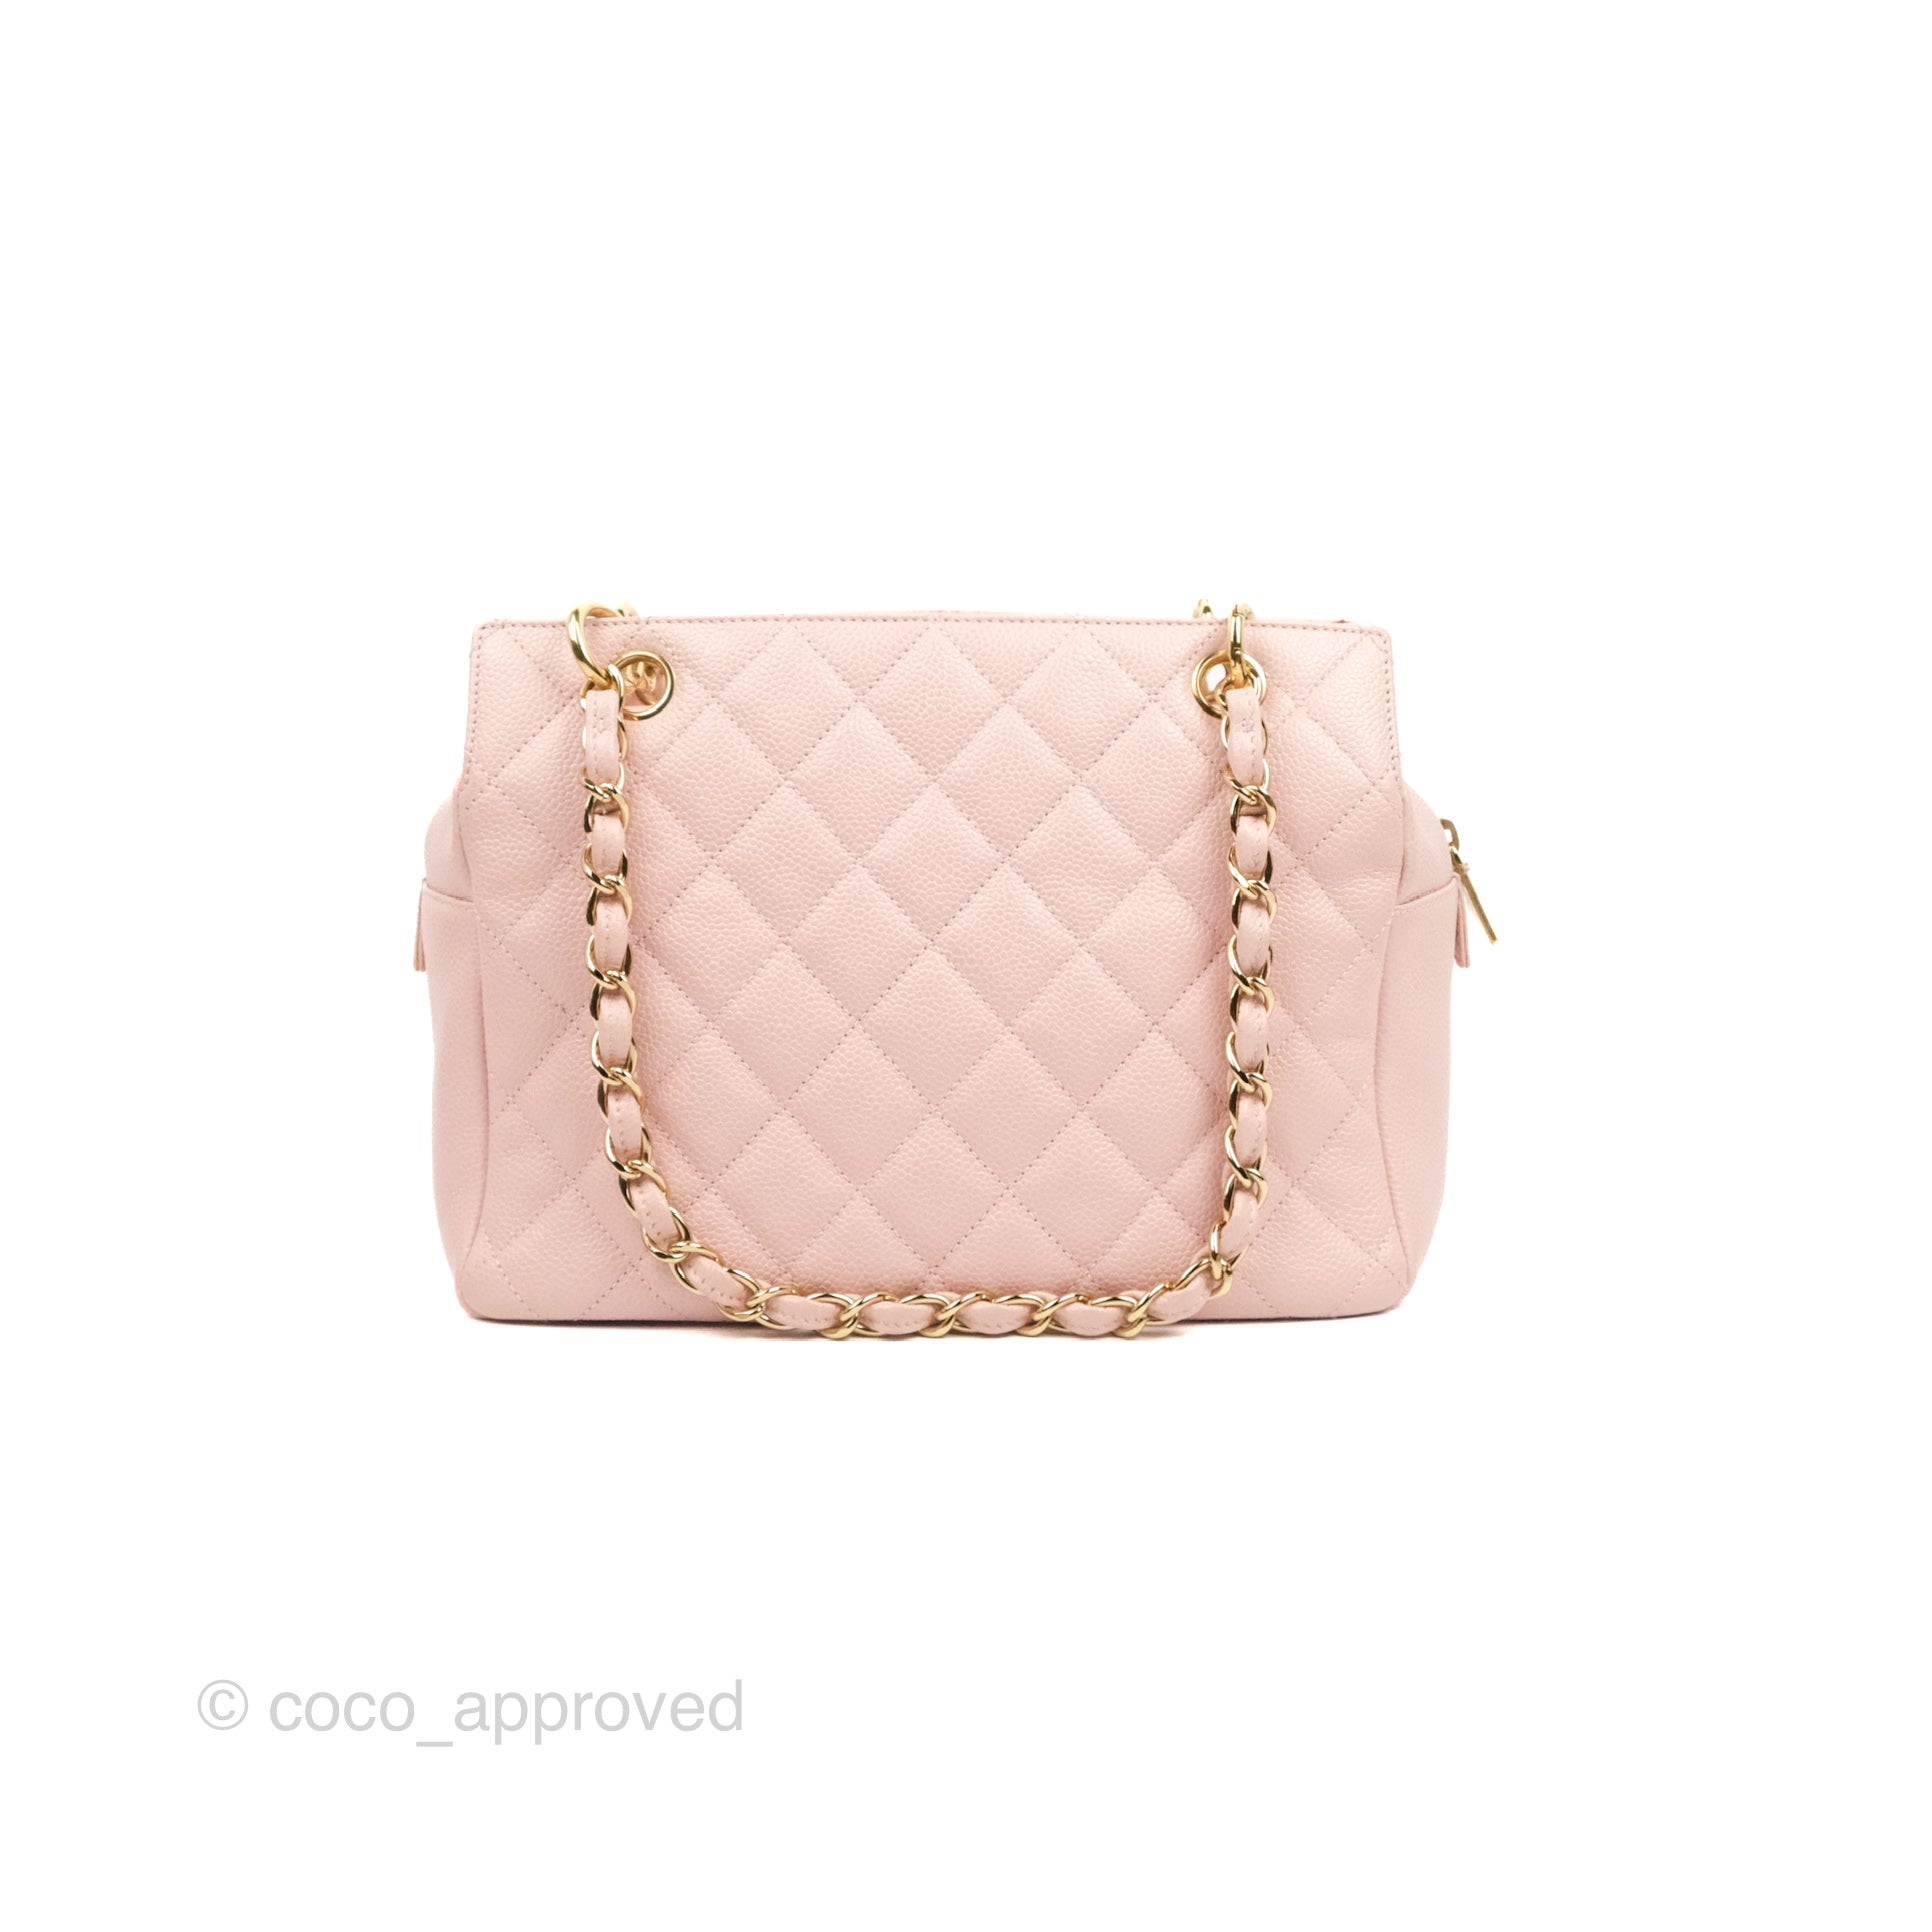 pink chanel tote bag leather